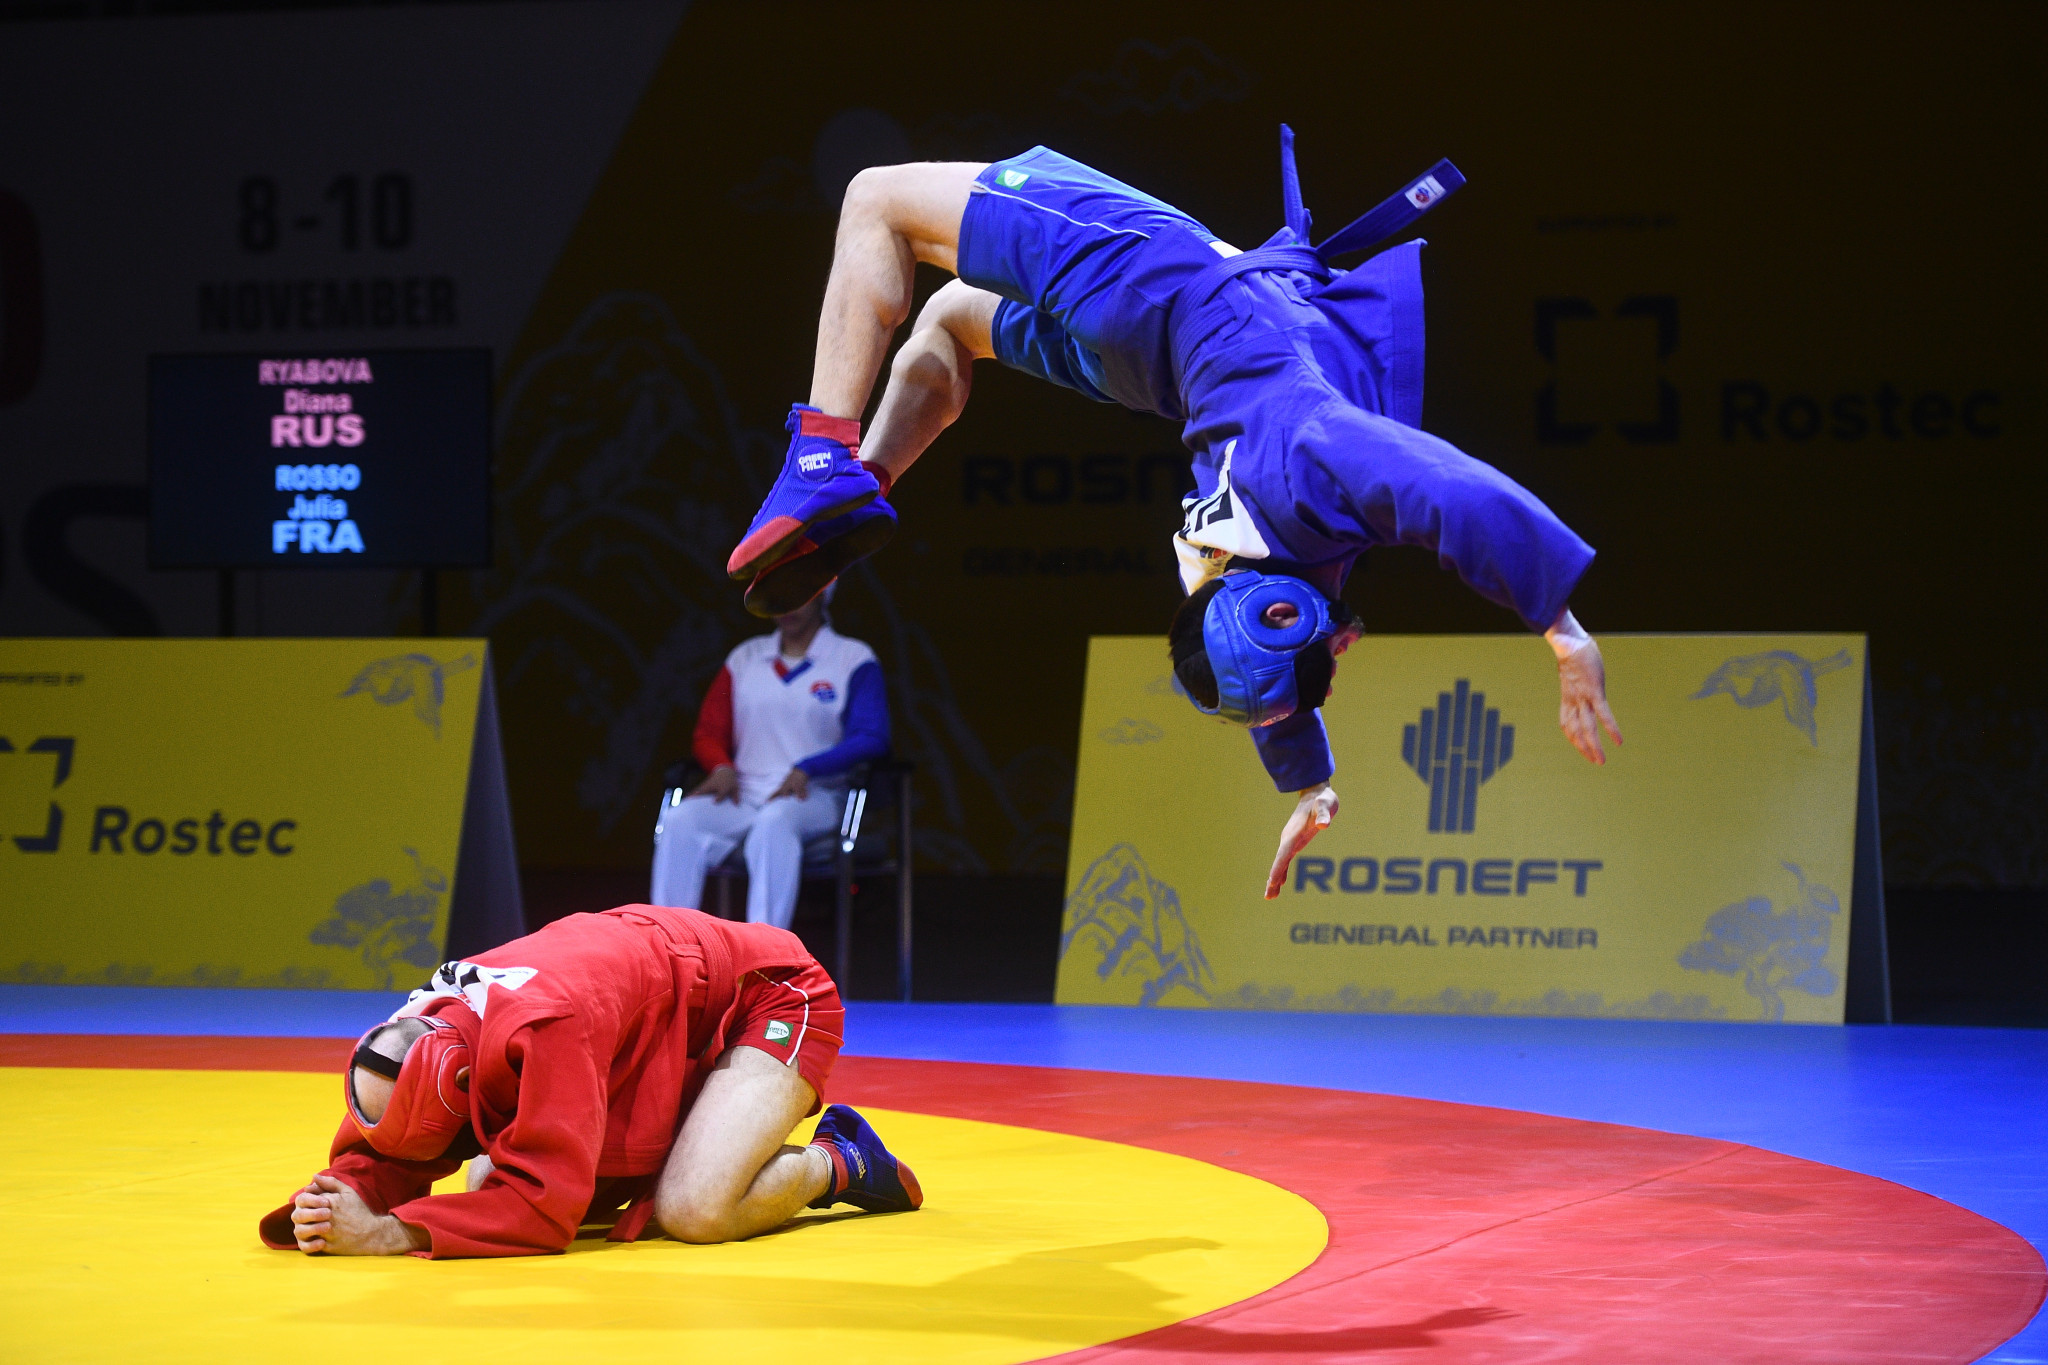 An appreciative crowd were treated to a dramatic blind sambo demonstration at the World Sambo Championships ©FIAS 